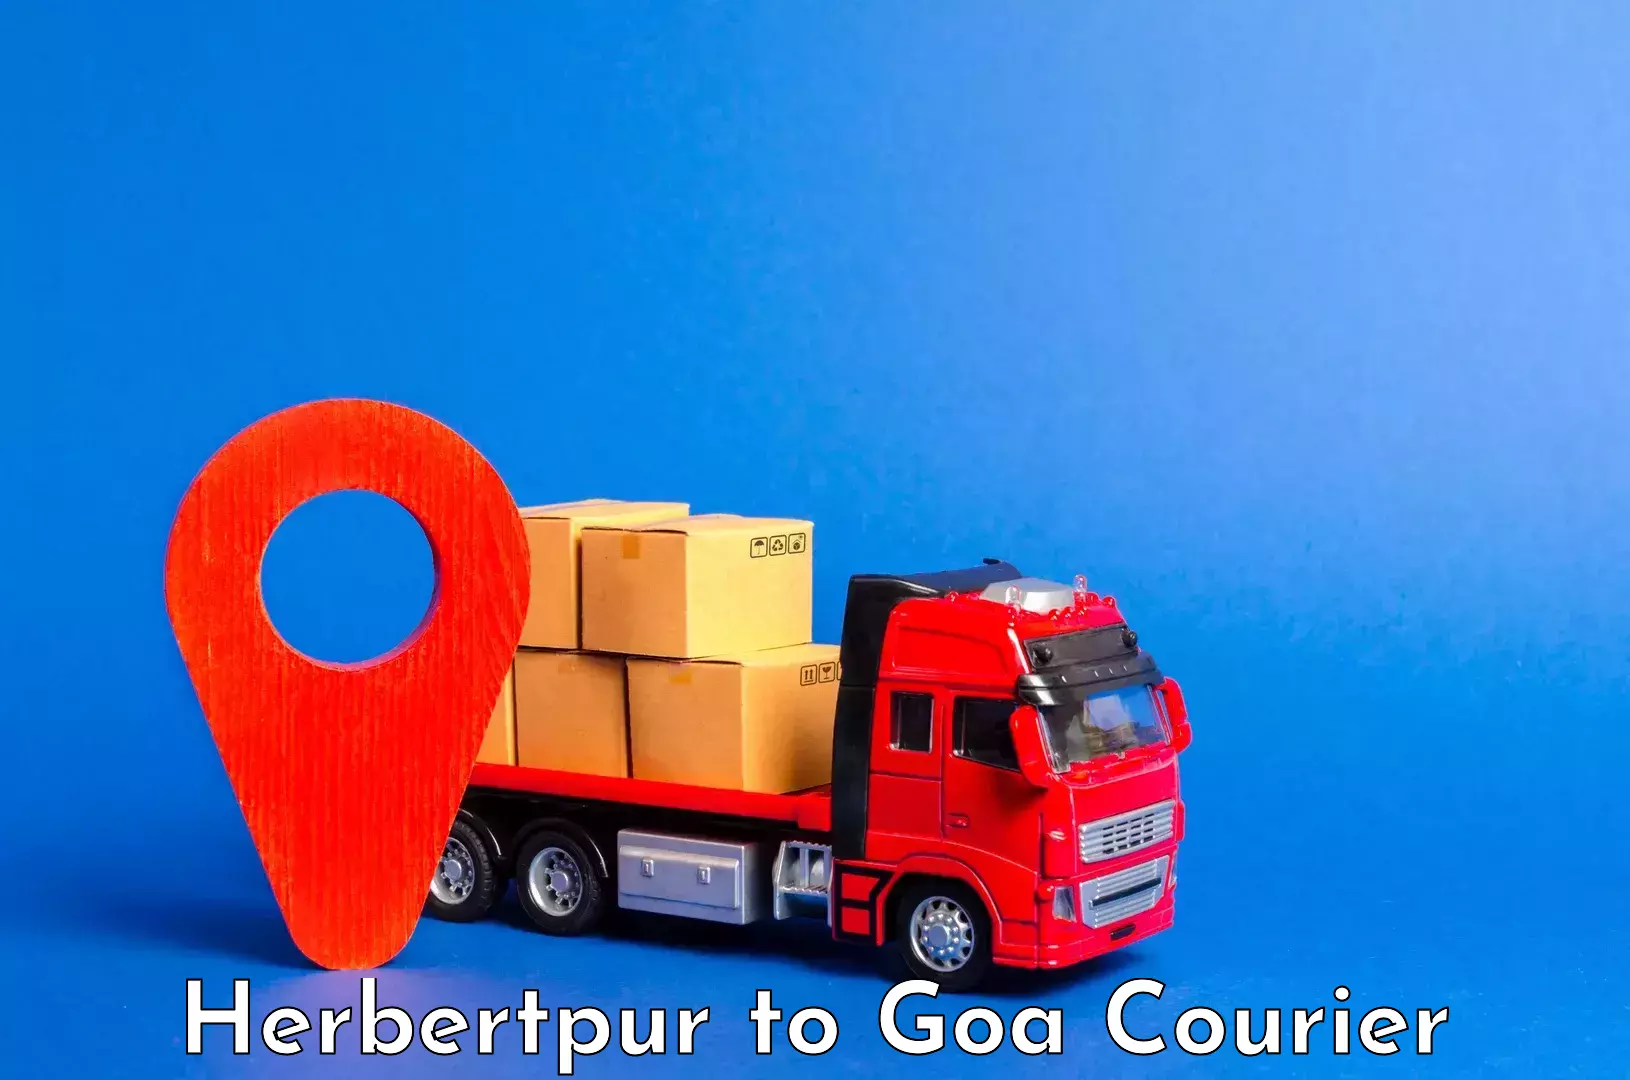 Luggage delivery network Herbertpur to Goa